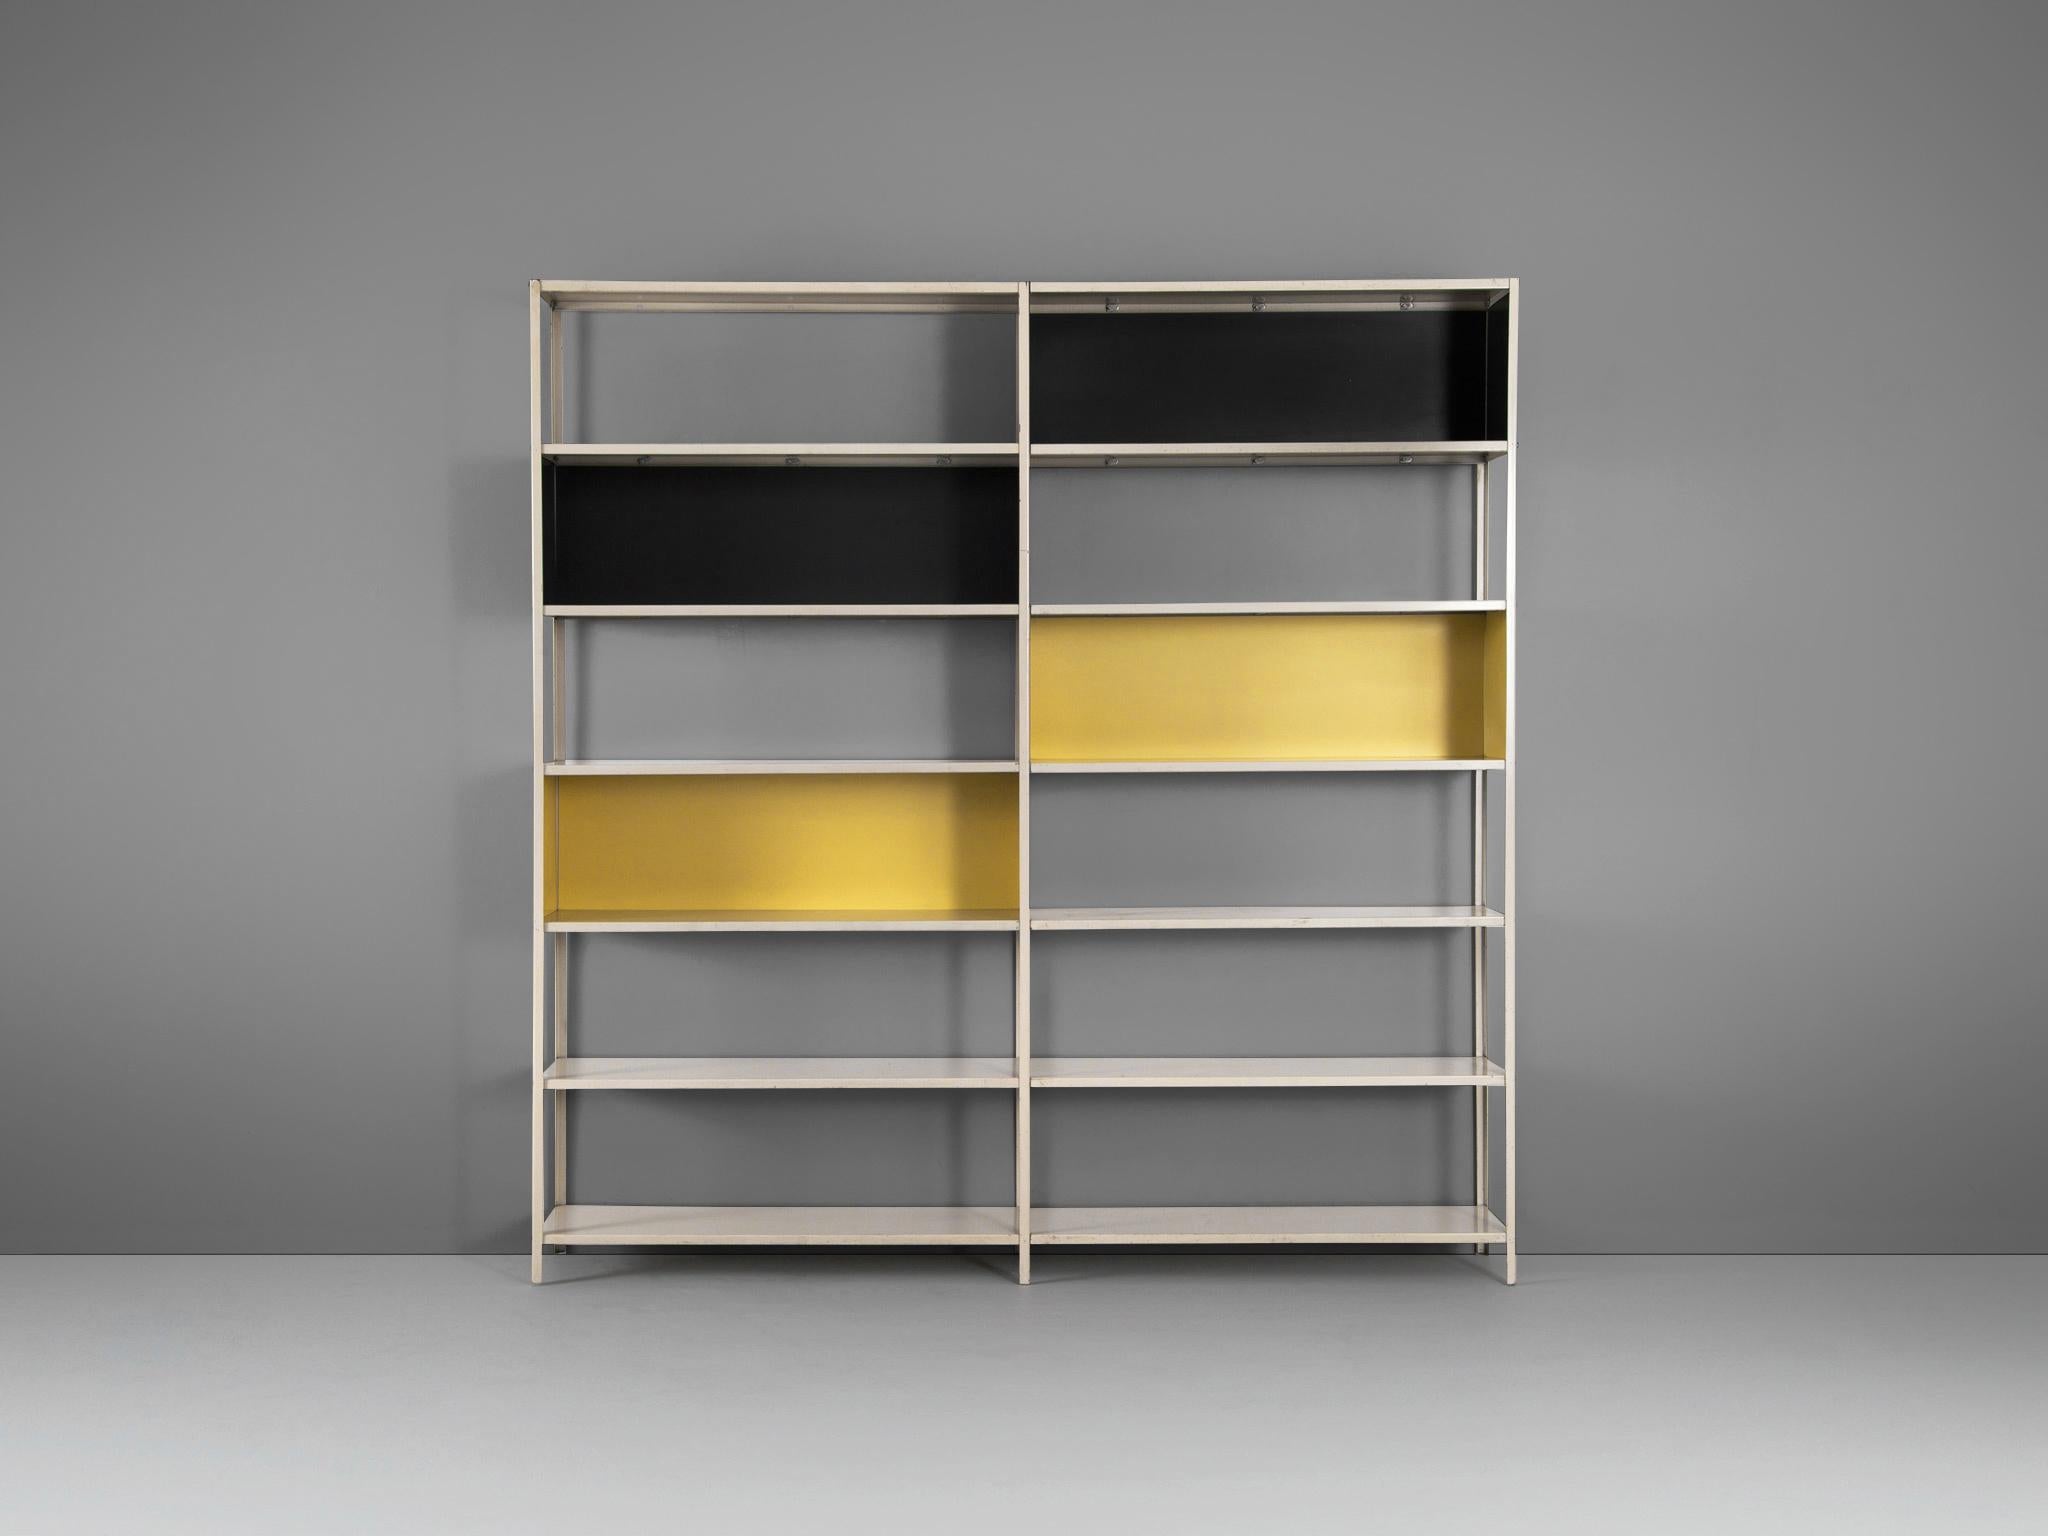 Friso Kramer for 'De Bijenkorf', tricolor shelf, metal, the Netherlands, design 1953

This open shelf has two columns that feature four open cabinets in black and yellow sides. The structure of the shelf is held in a beige color, overall a distinct